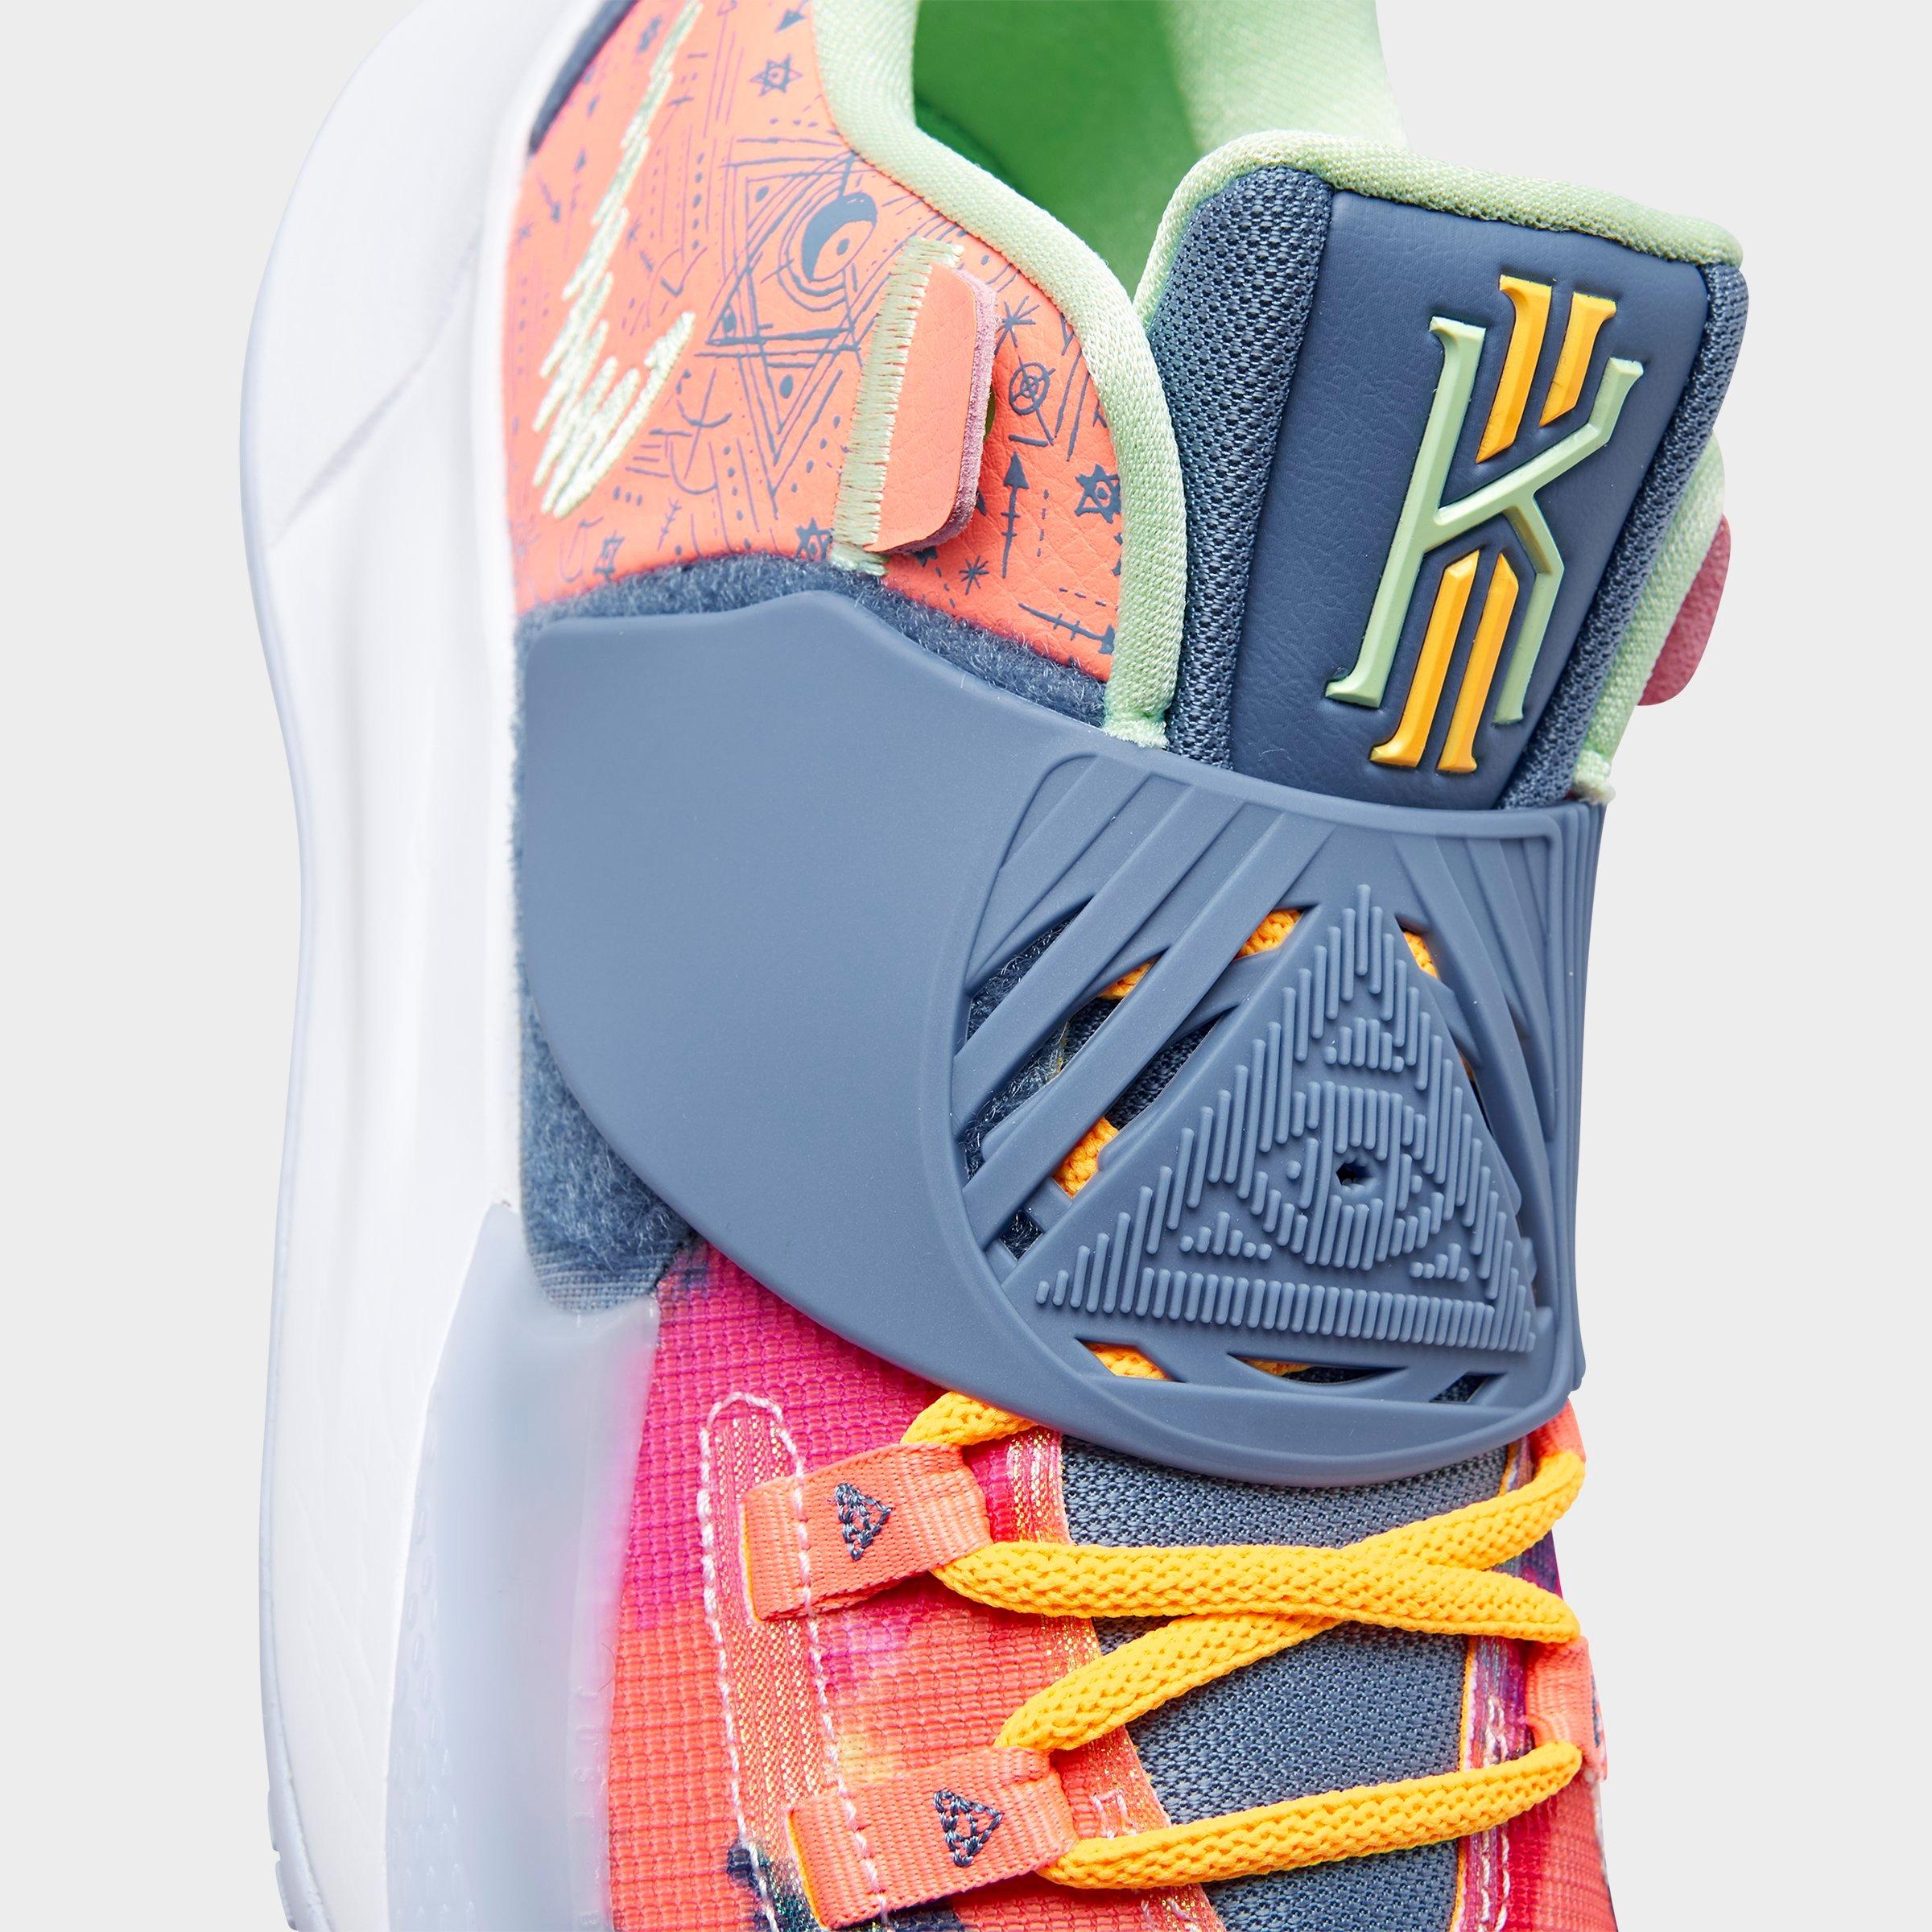 kyrie low by you women's basketball shoe